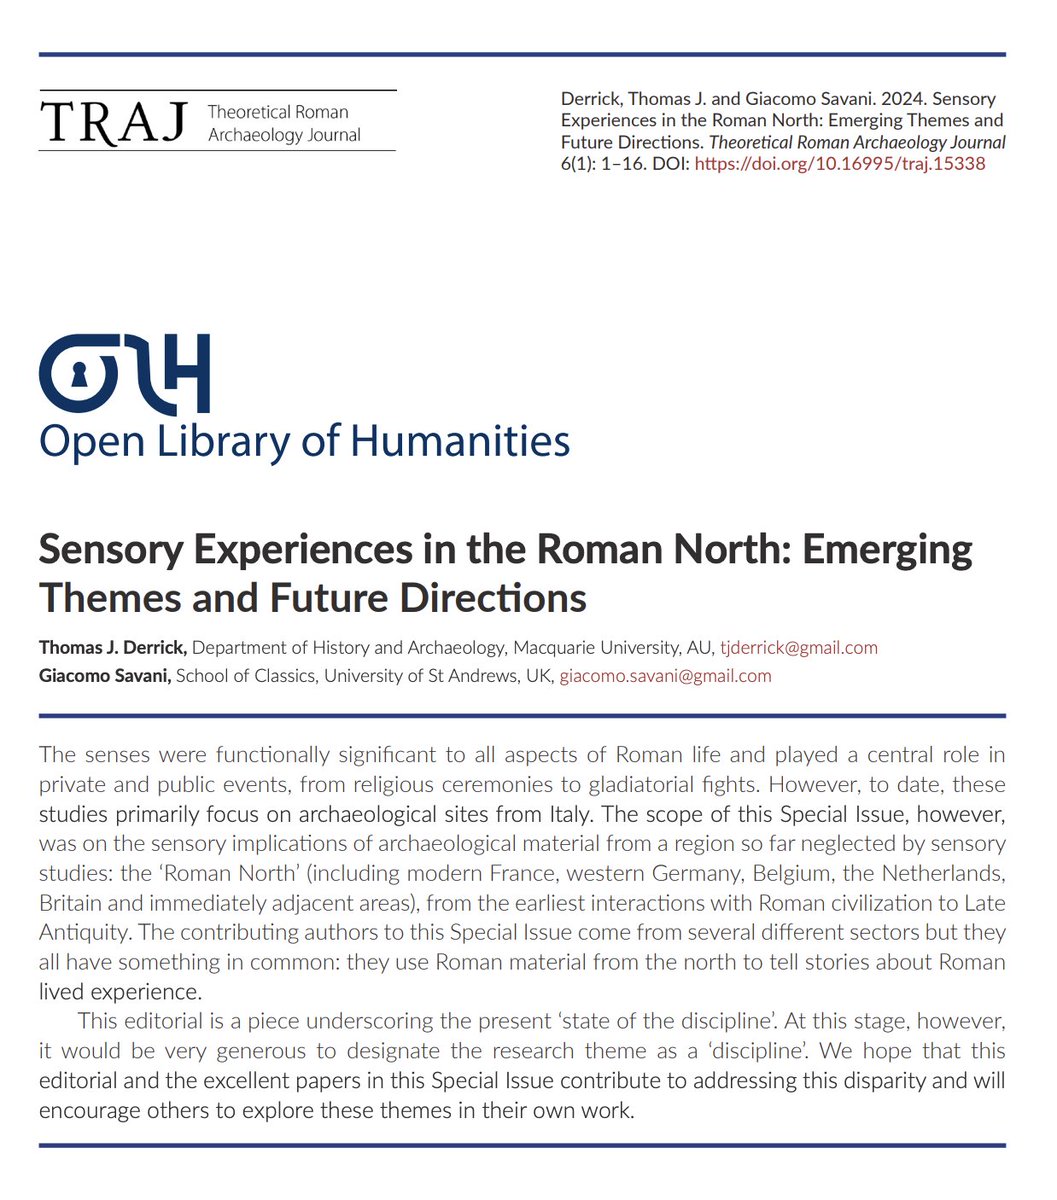 🥳 #TRAJ Vol 6 is complete! We are very happy to publish the editorial for @TJ_Derrick & @GiacomoSavani's special issue: Sensory Experiences in the Roman North: Emerging Themes & Future Directions. ➡️ doi.org/10.16995/traj.… #RomanArchaeology #SensoryArchaeology #RomanBritain